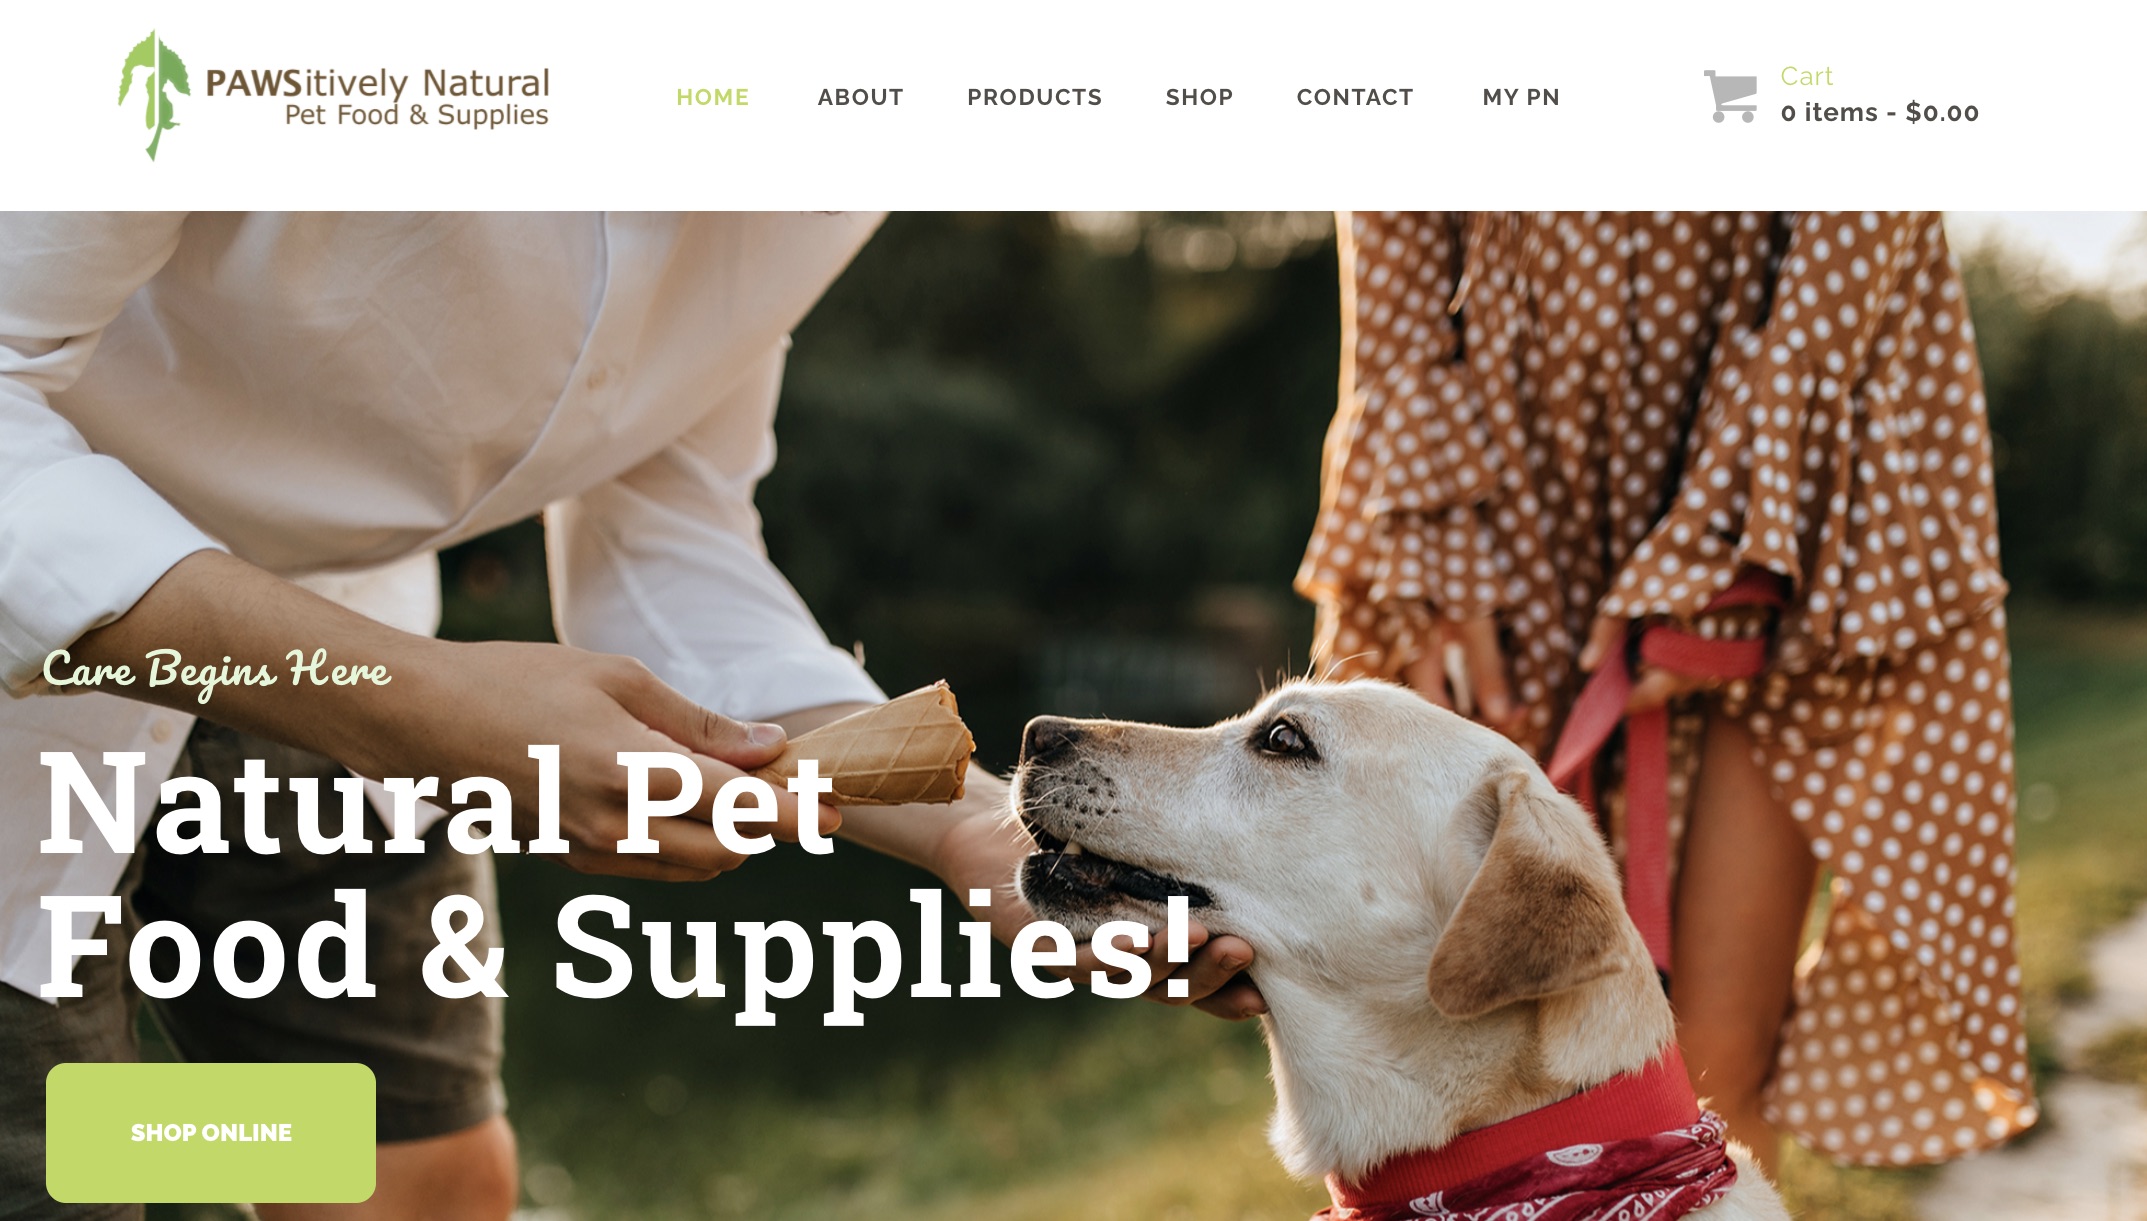 PAWSitively Natural Pet Food & Supplies